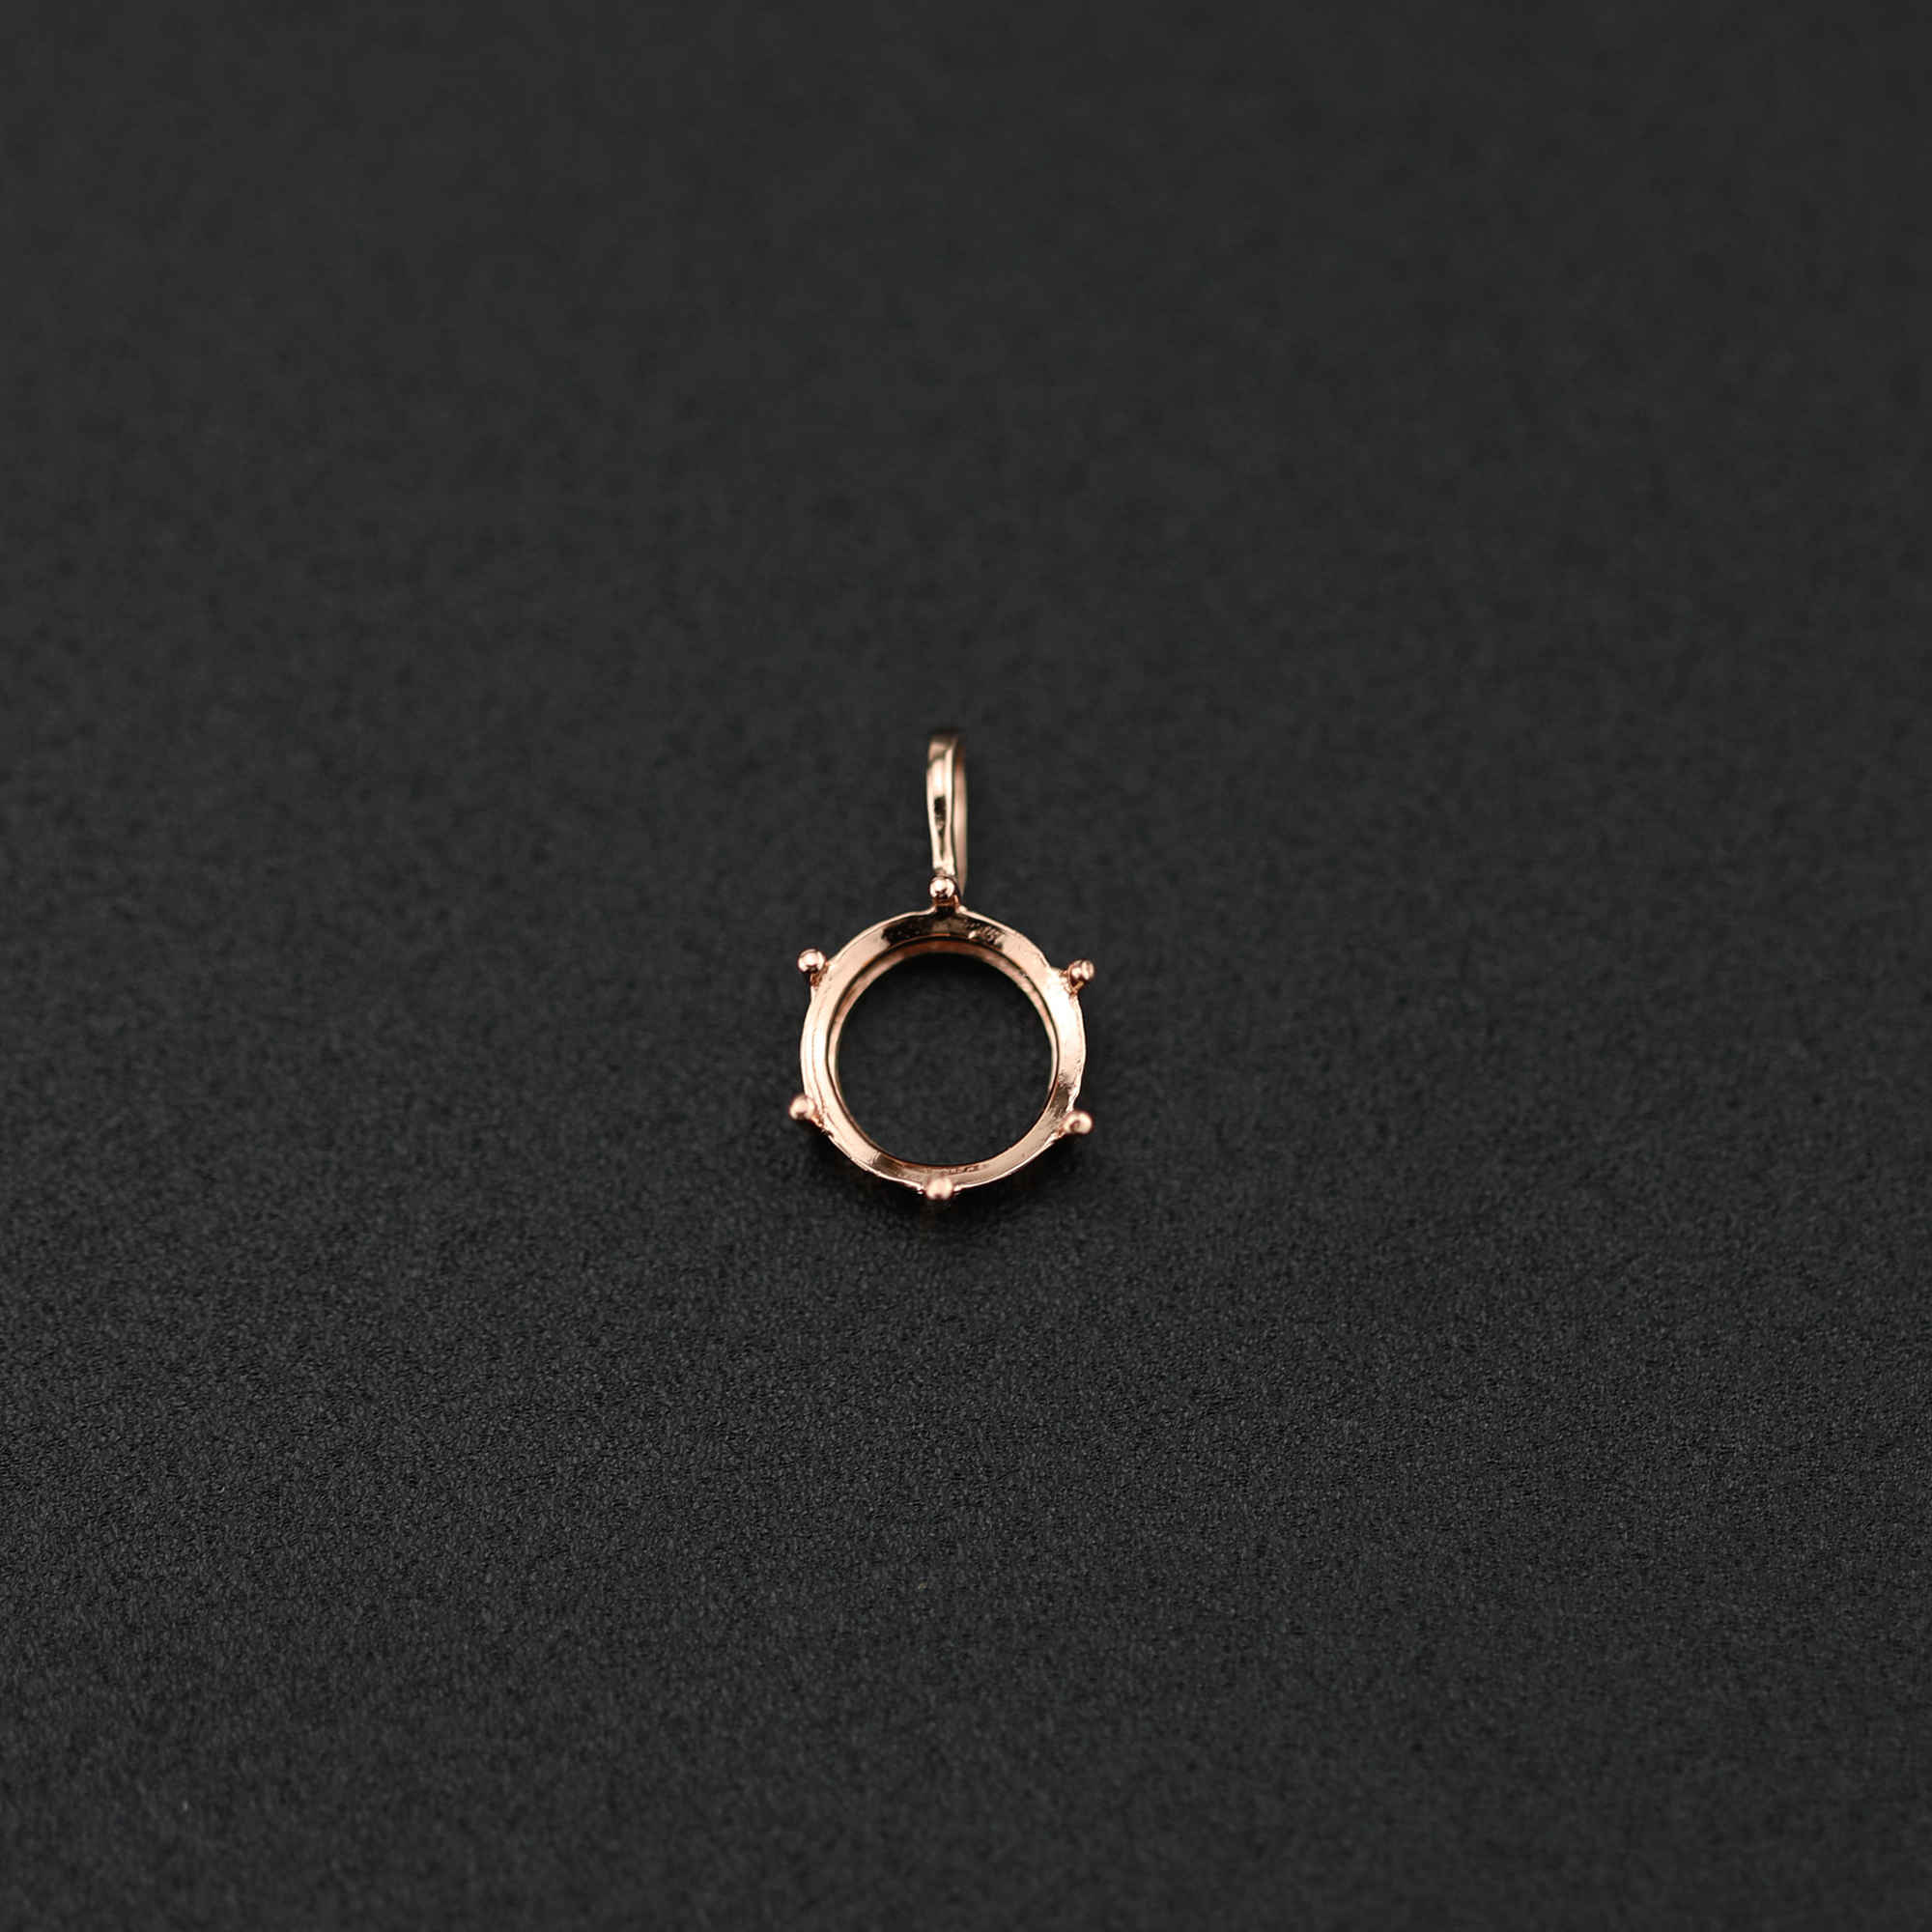 1Pcs 6-8MM Simple Round Prong Bezel Rose Gold Plated Solid 925 Sterling Silver Pendant Blank Settings for Moissanite Gemstone 1411249 - Click Image to Close